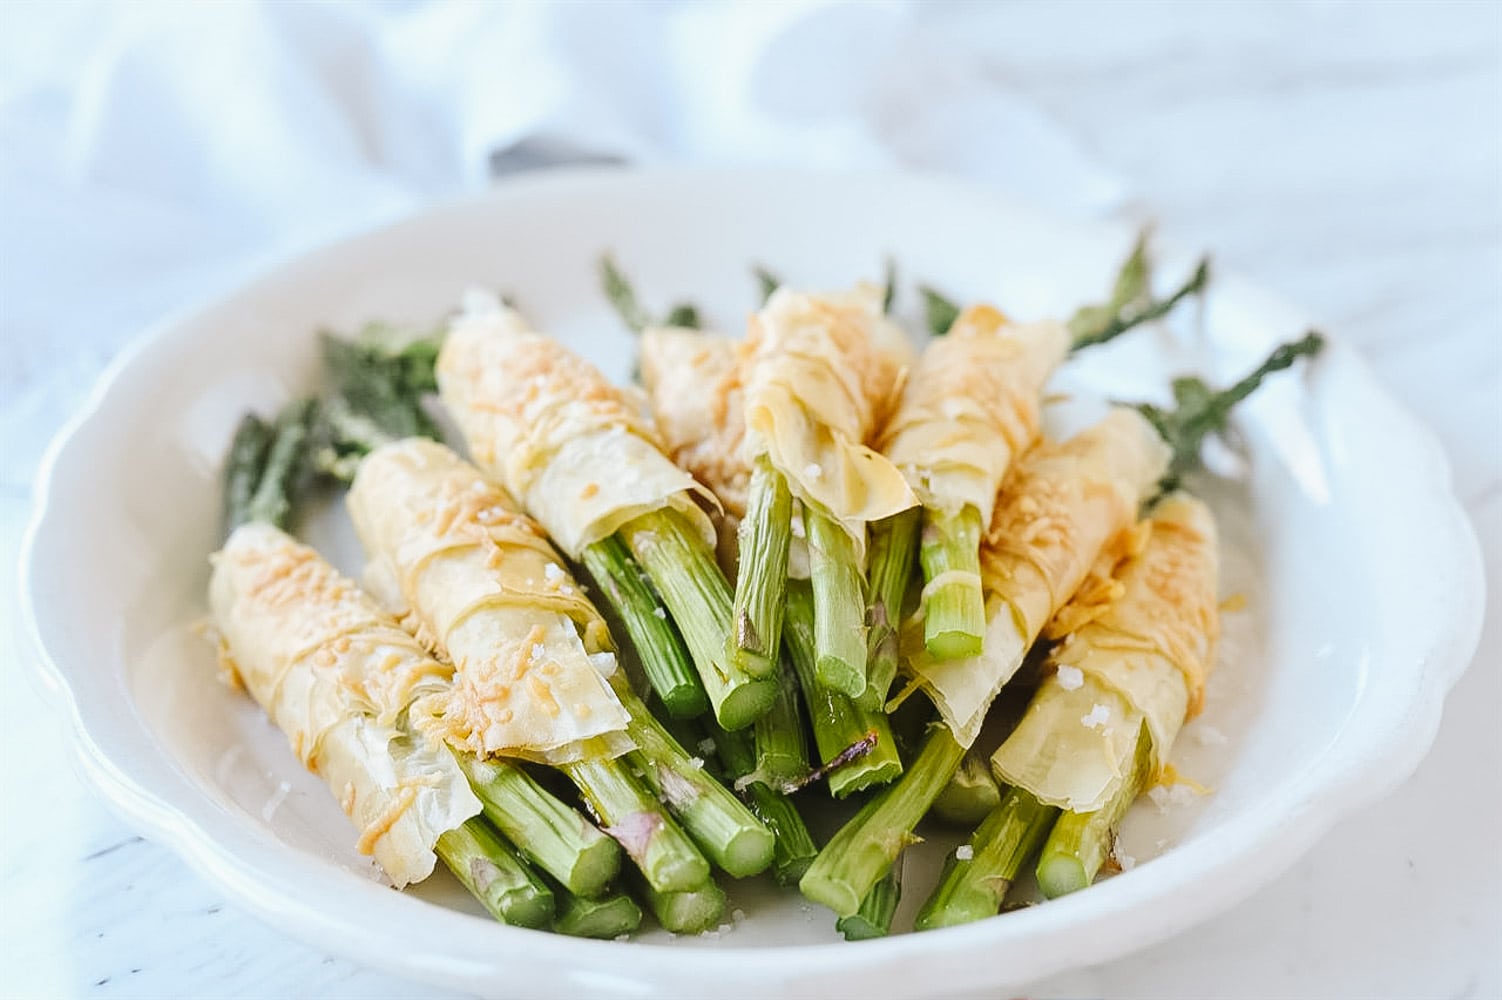 phyllo wrapped asparagus in a pile on a plate